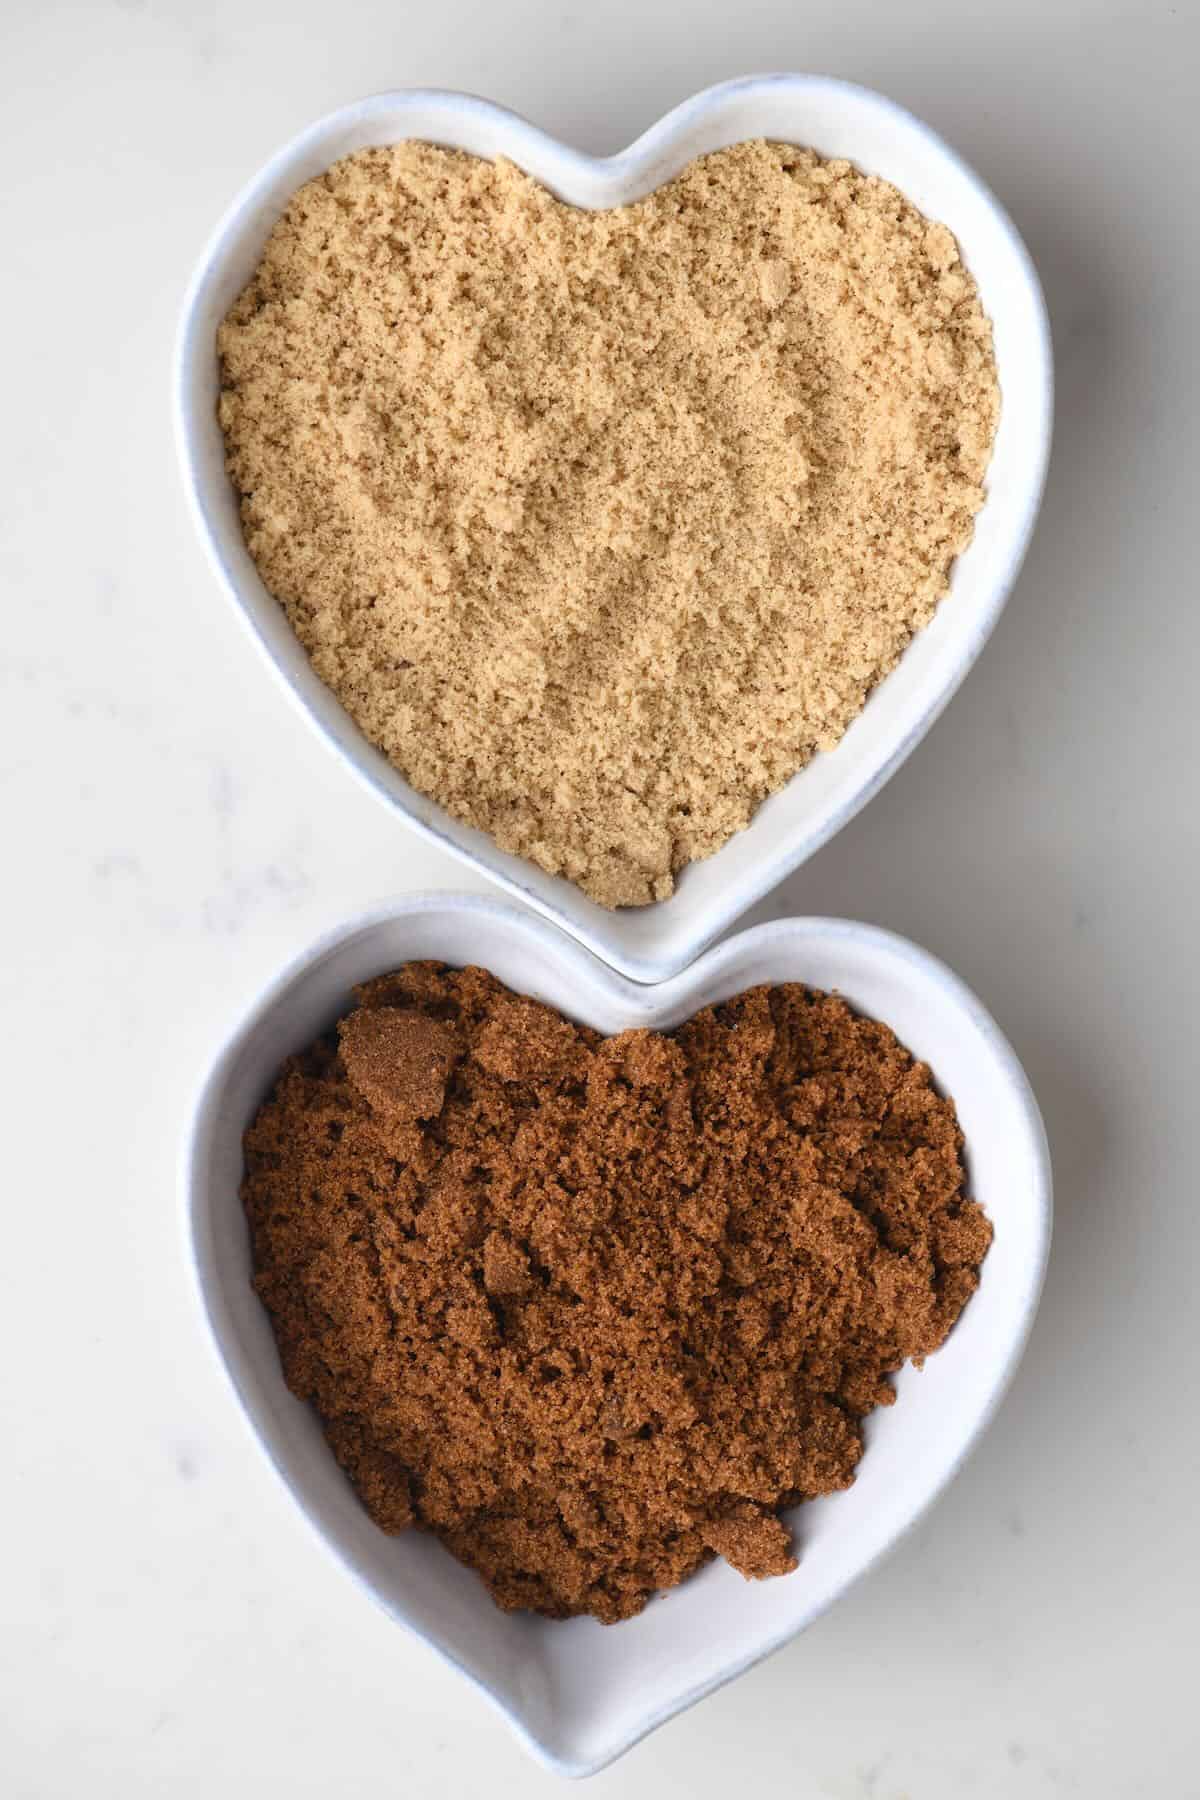 How to Make Brown Sugar without Molasses